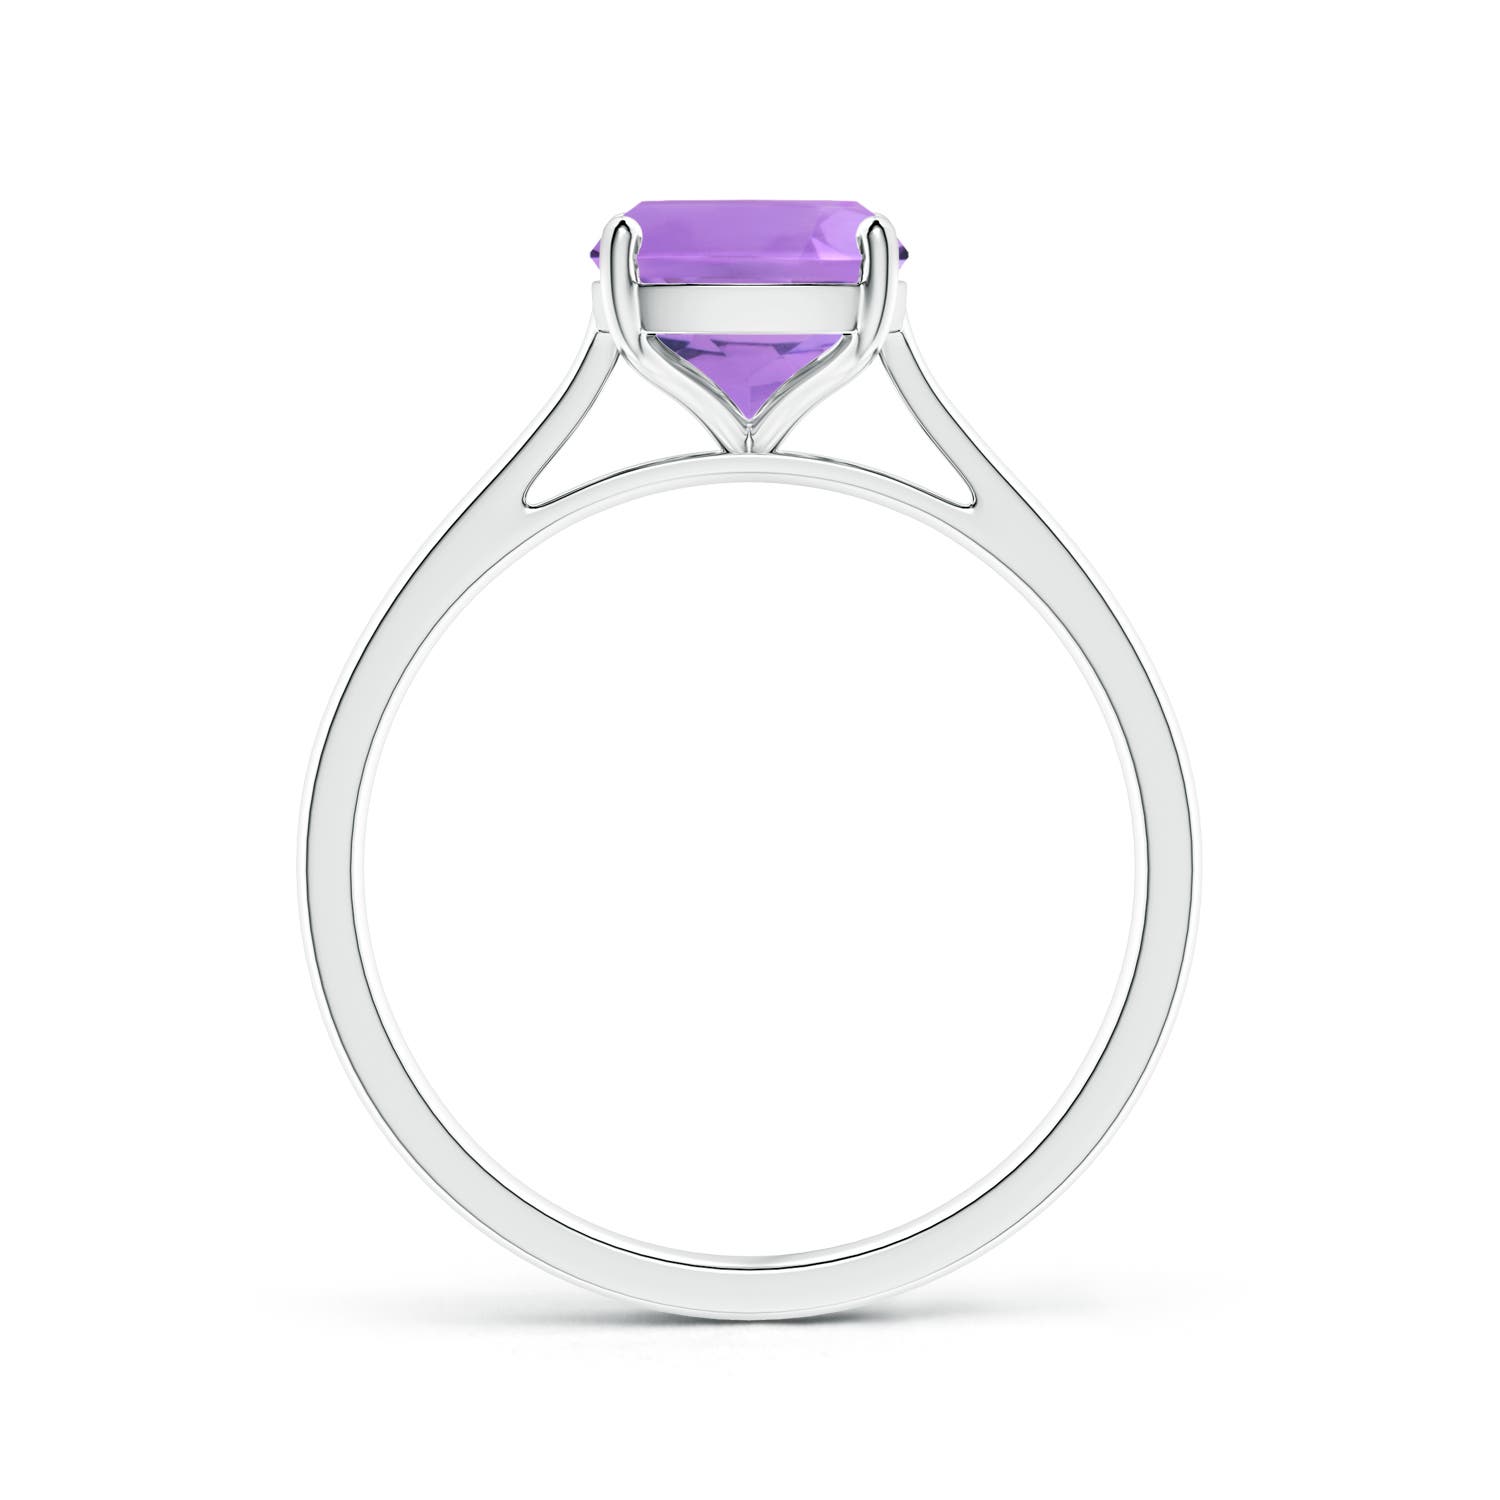 A - Amethyst / 2 CT / 14 KT White Gold